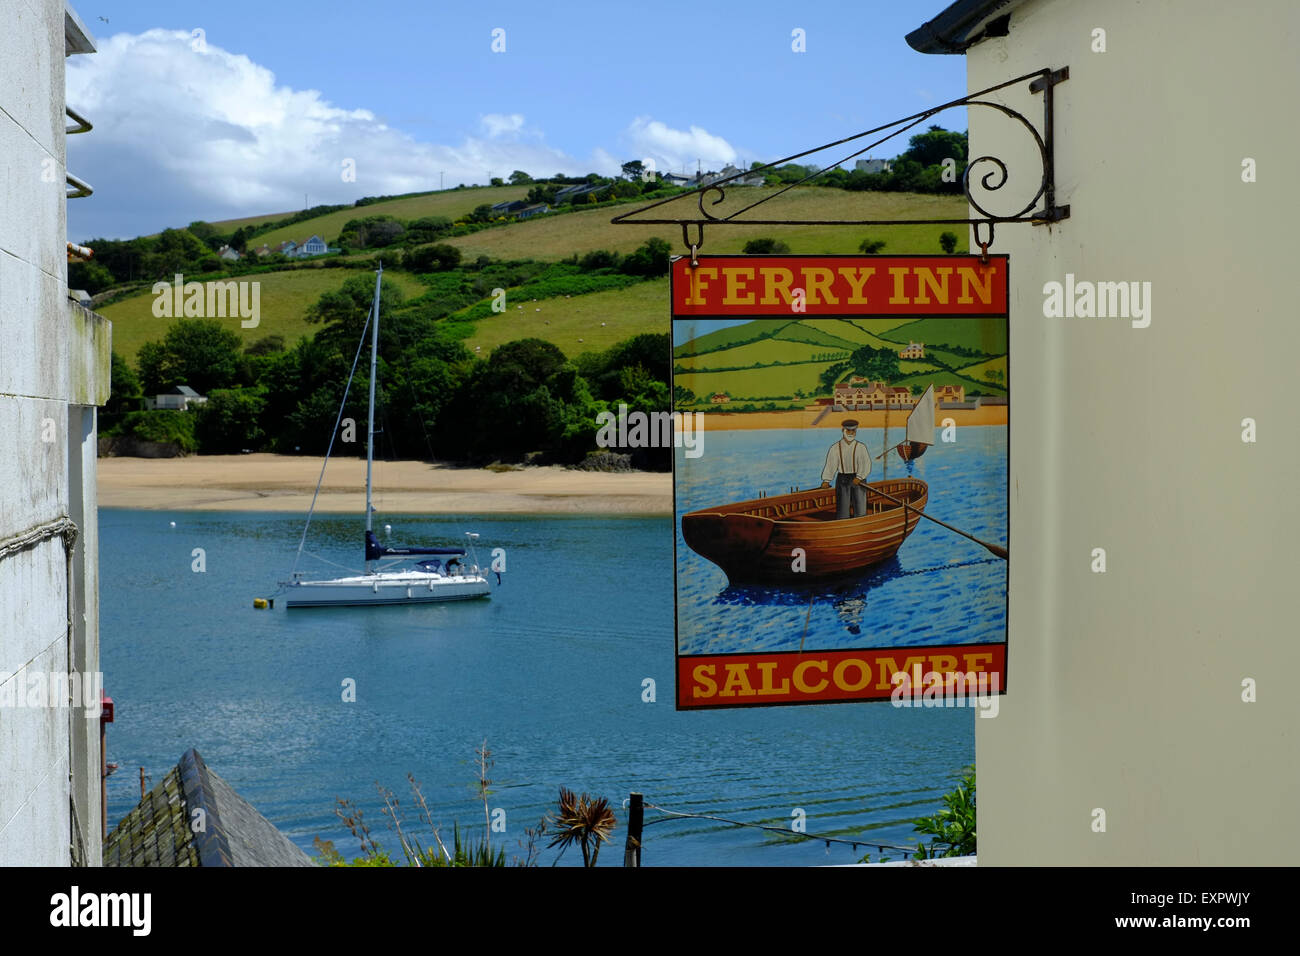 Salcombe, Devon, UK. The Ferry Inn Pub Sign at Salcombe with River and boat in background. Stock Photo